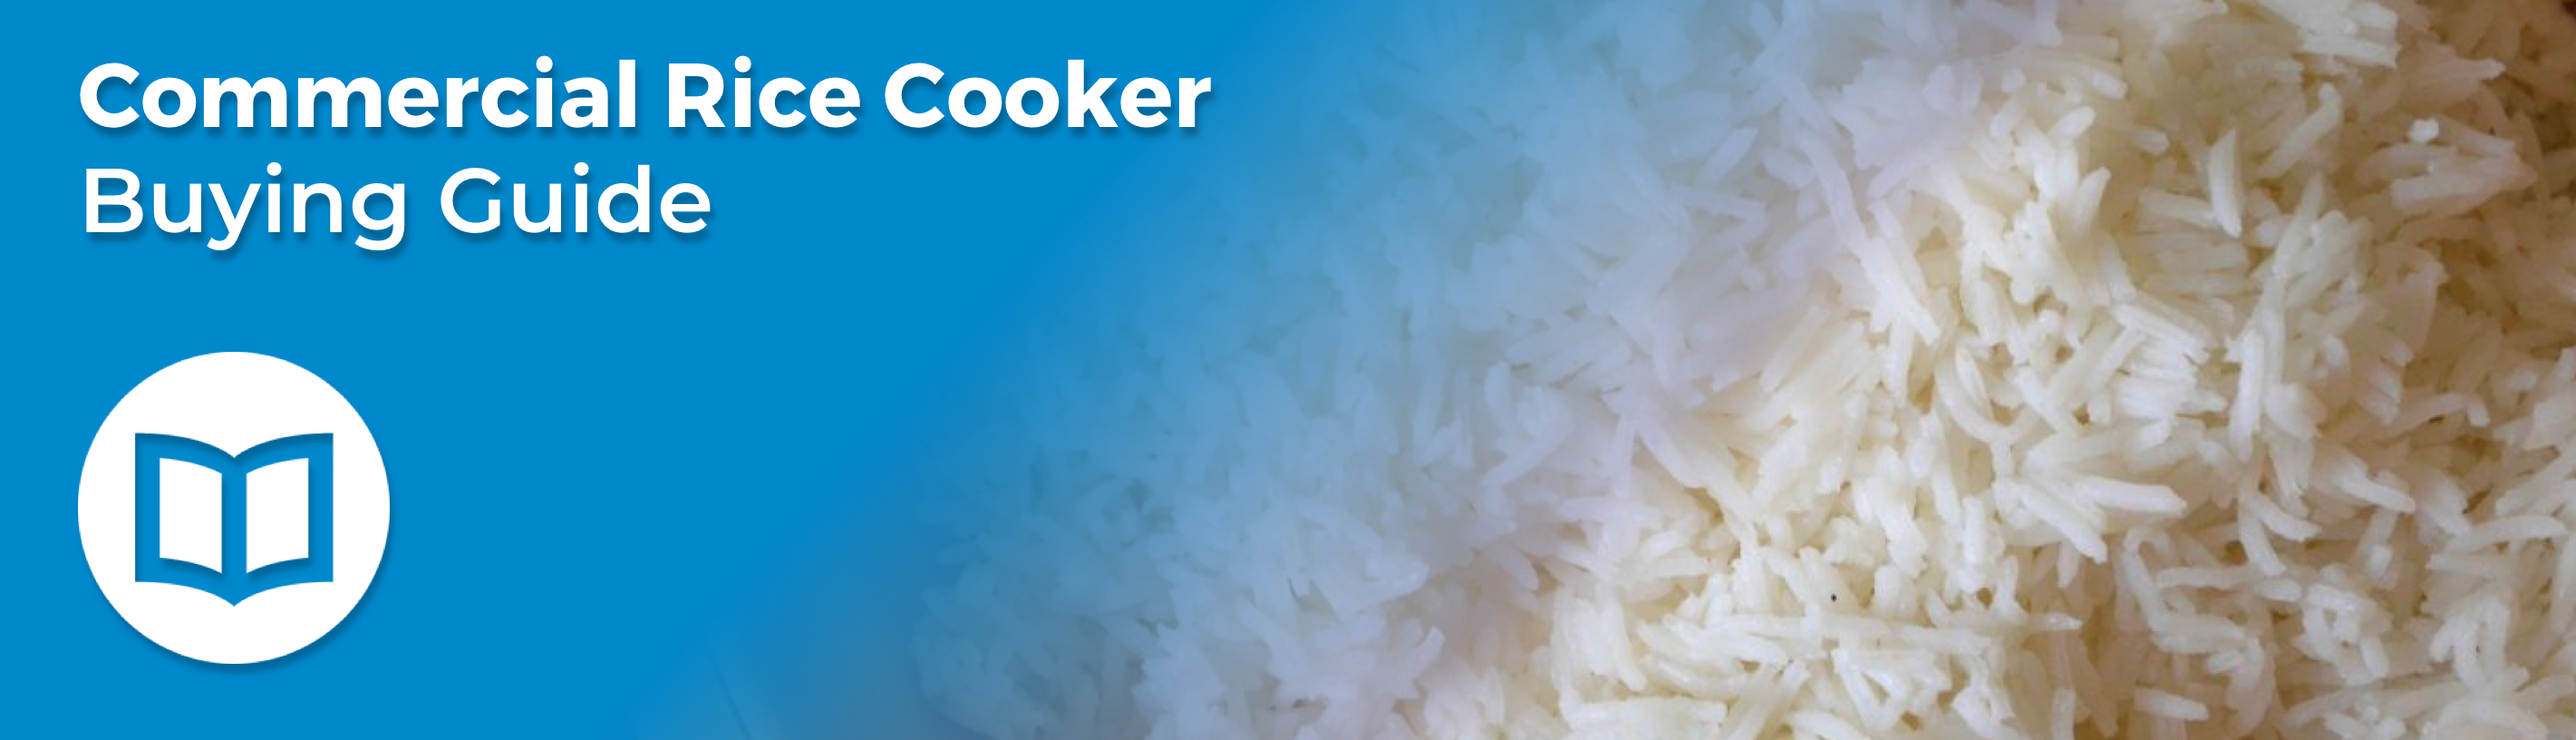 Commercial Rice Cooker Buying Guide